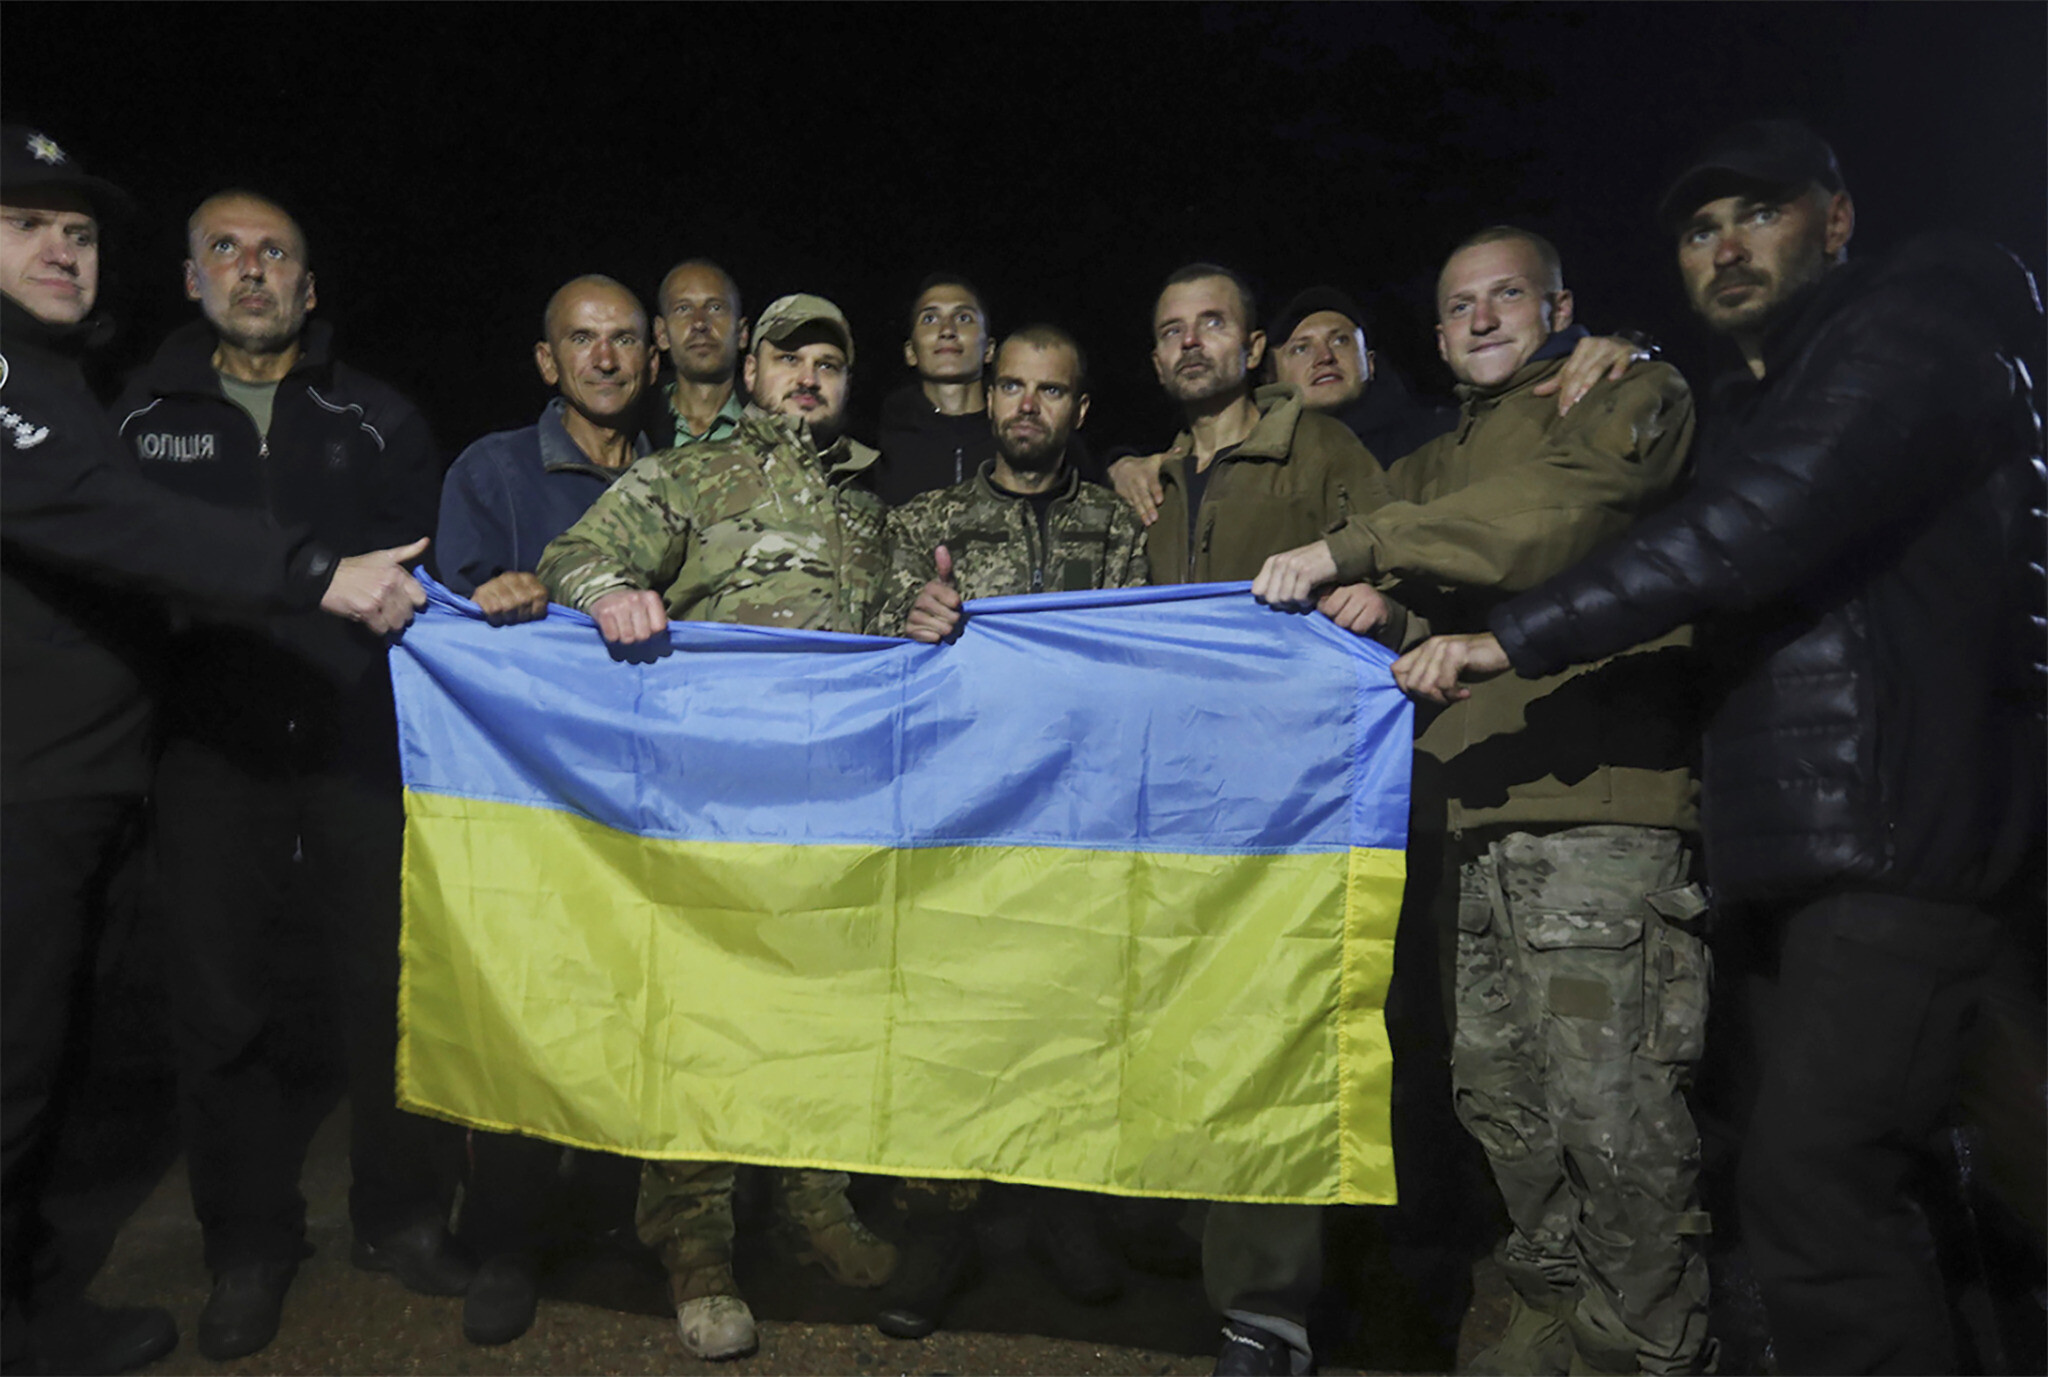 Russia frees 215 Mariupol defenders in swap for Putin oligarch ally and 54 others The Times of Israel hq nude image